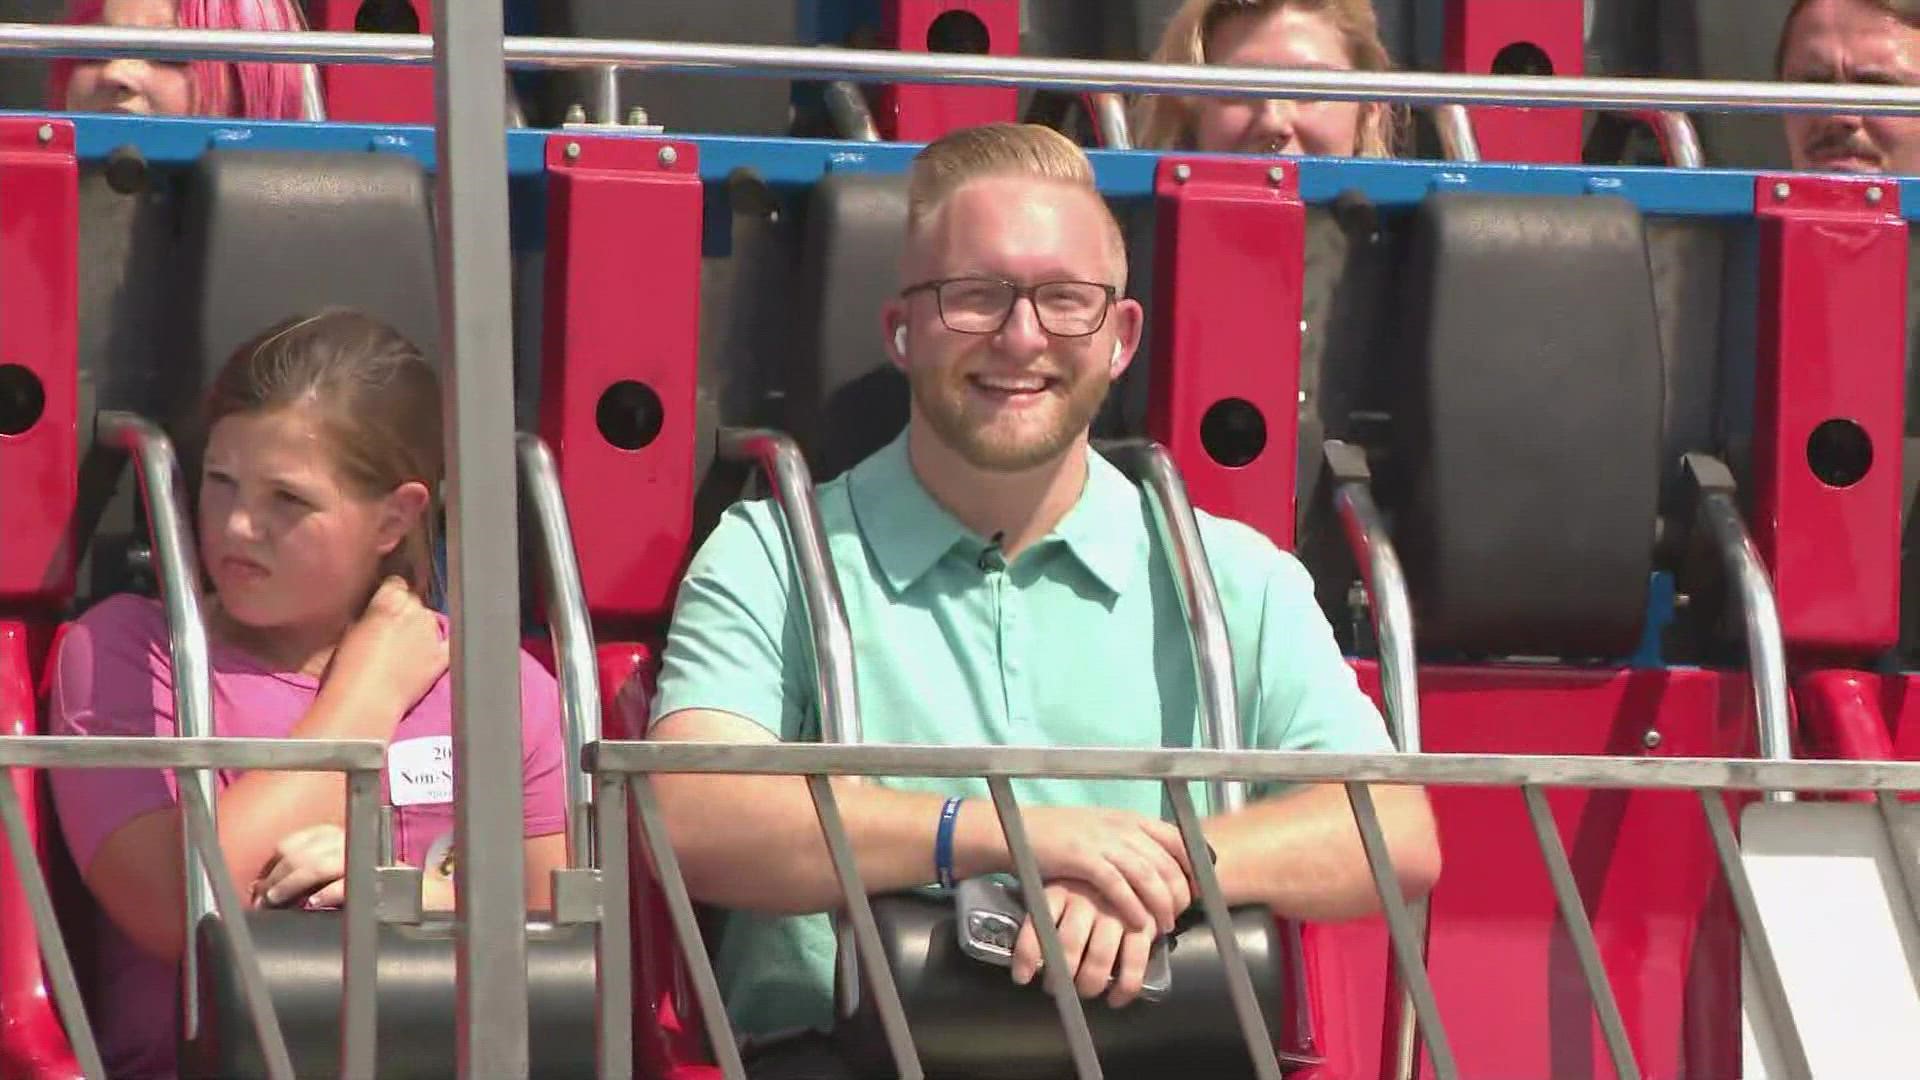 WHAS11's Connor Steffen is checking out all the fun festivities at the Kentucky State Fair tonight and, of course, he's checking out the rides!